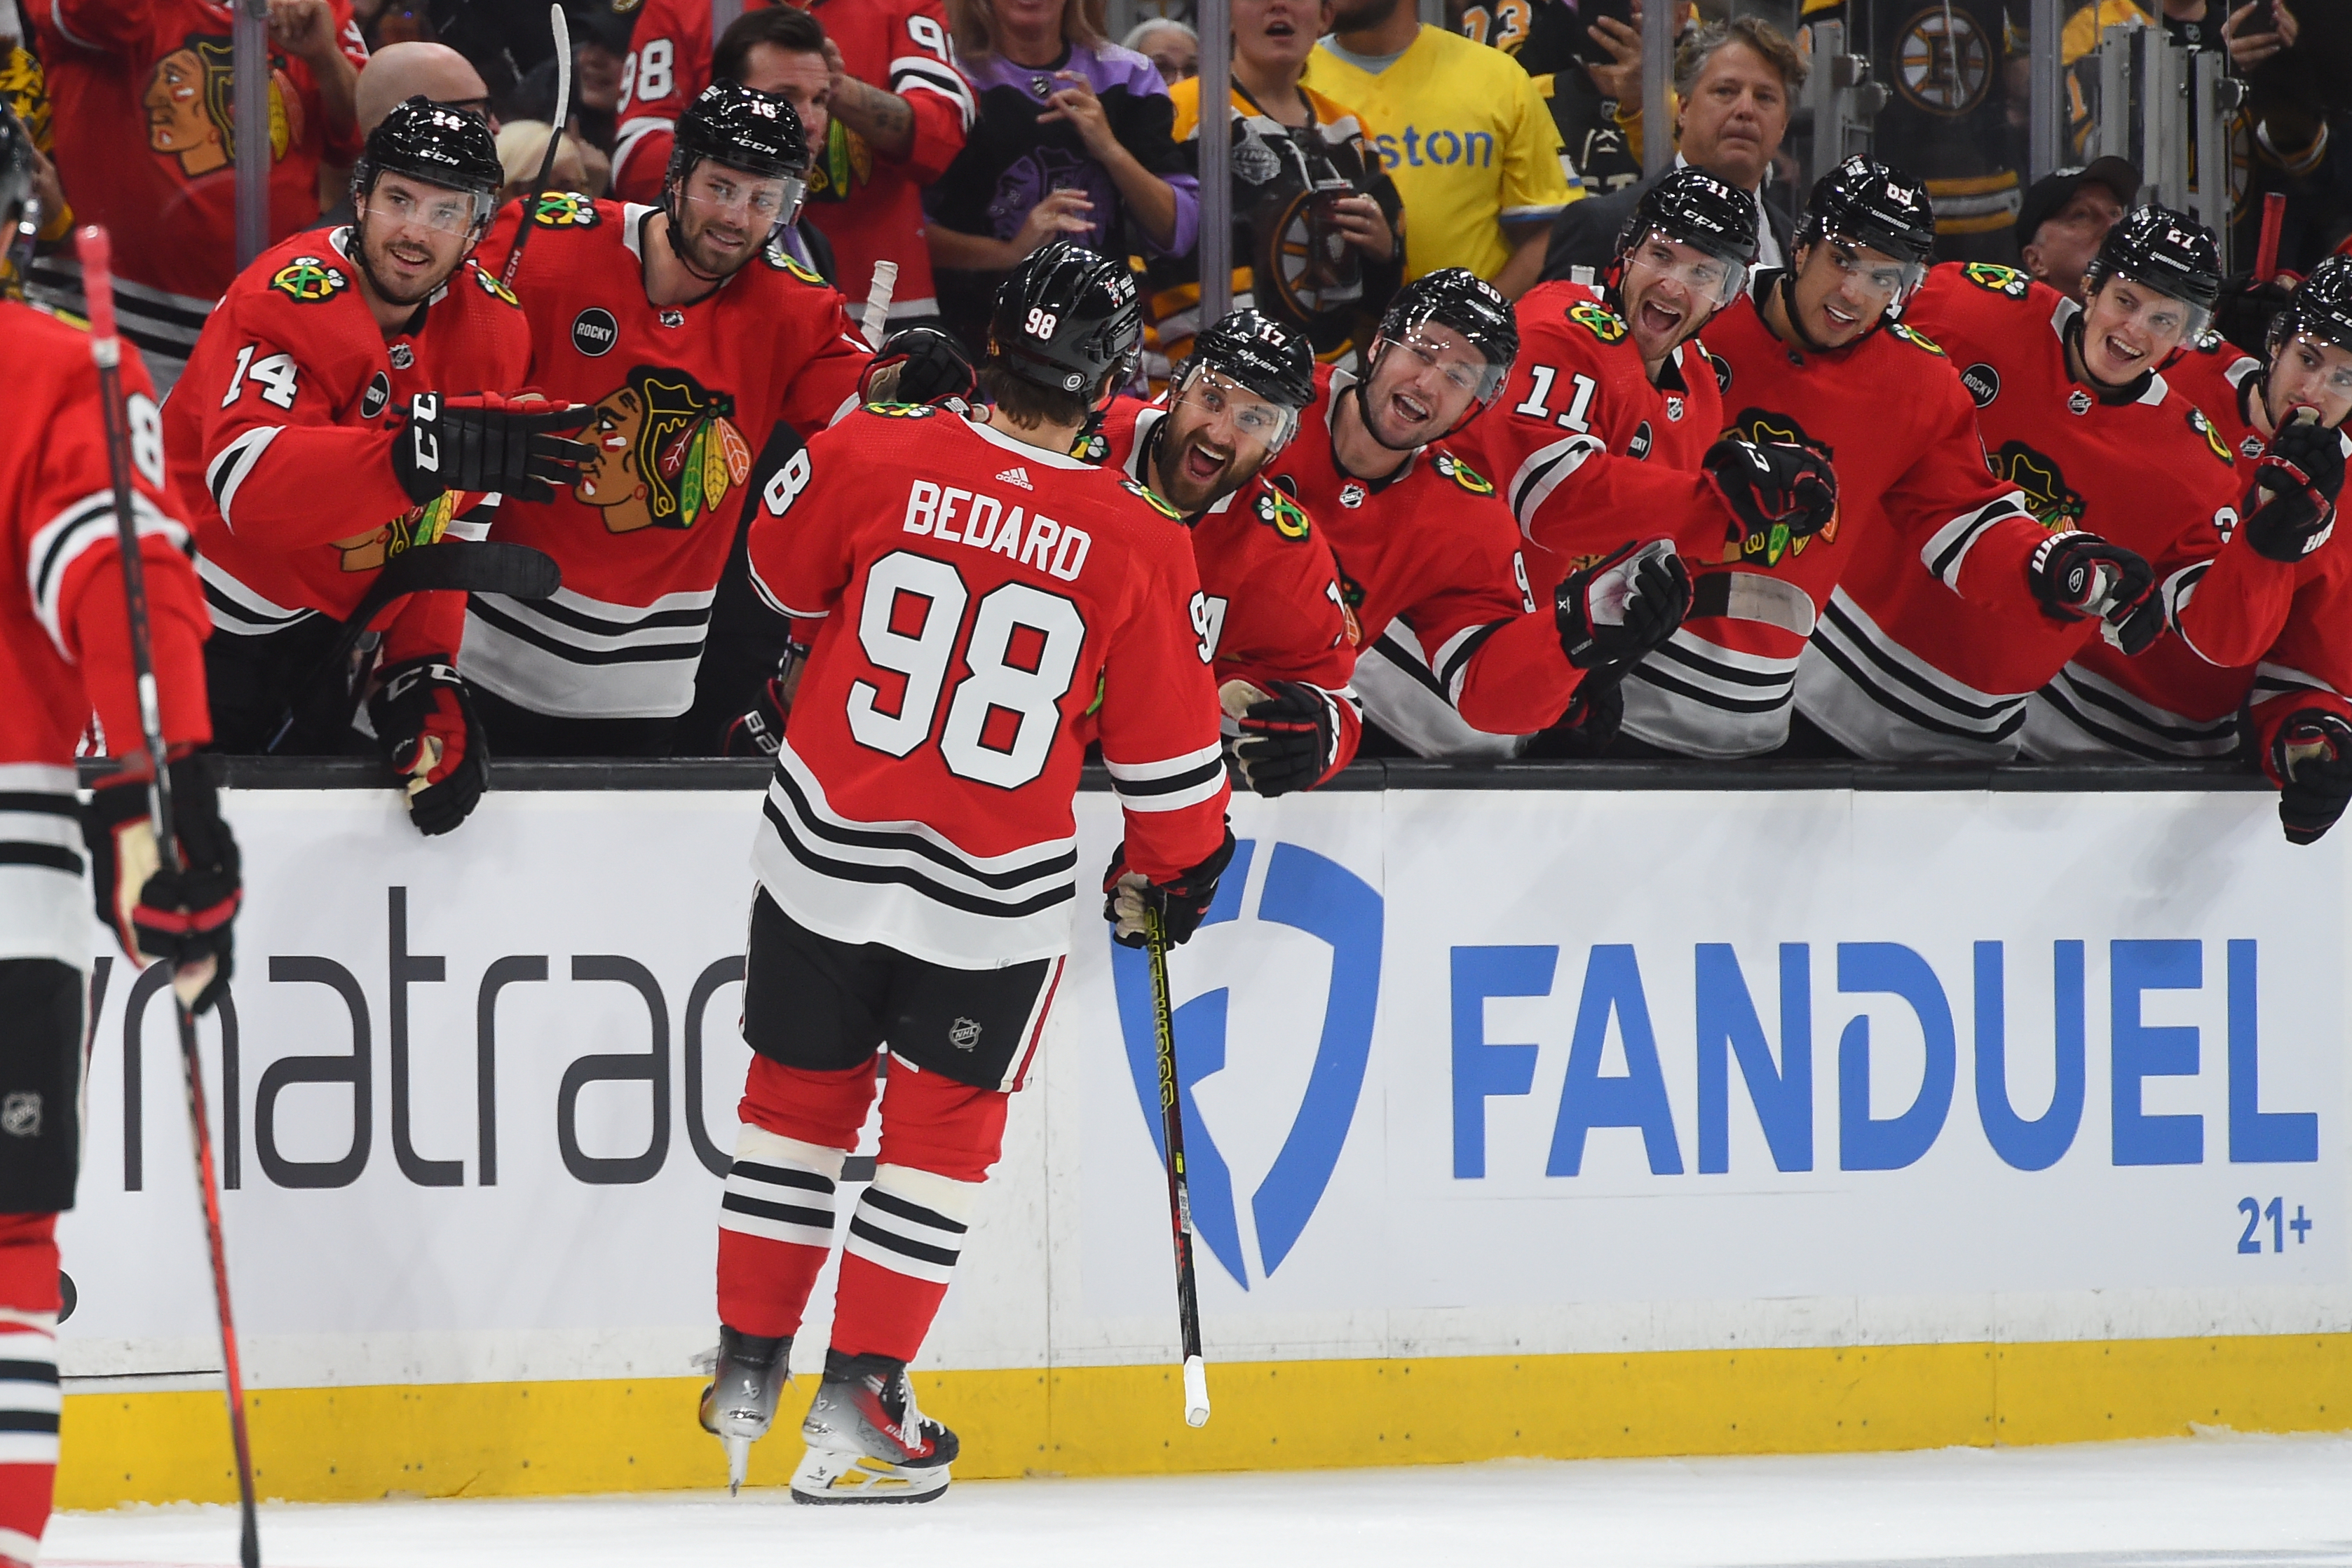 Brent Seabrook fifth Blackhawk to reach 1,000 games with team